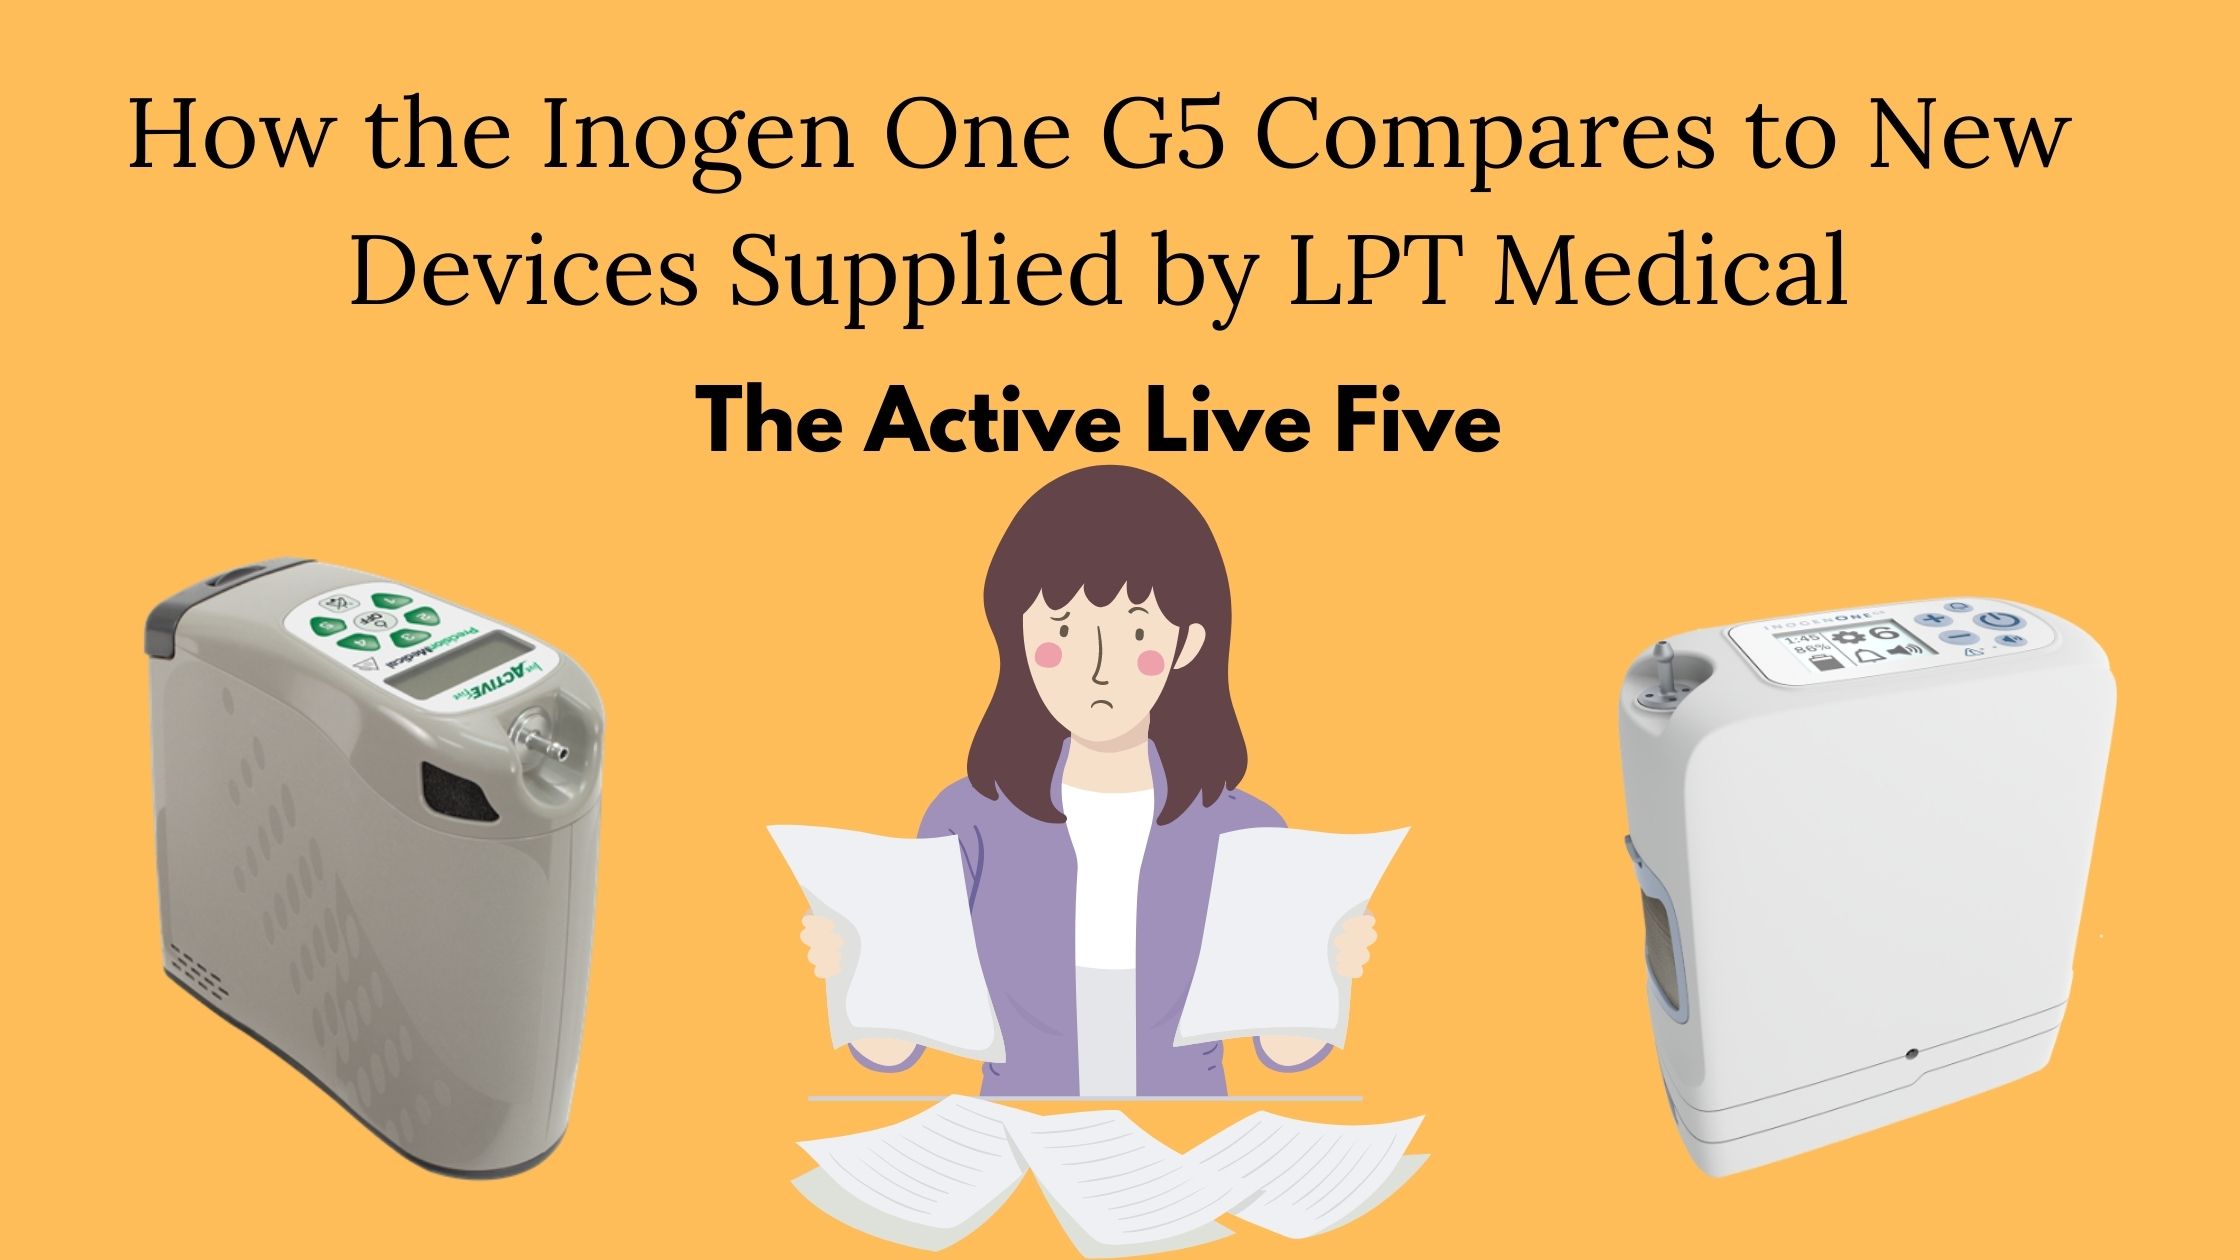 How the Inogen One G5 Compares to New Devices Supplied by LPT Medical (1)